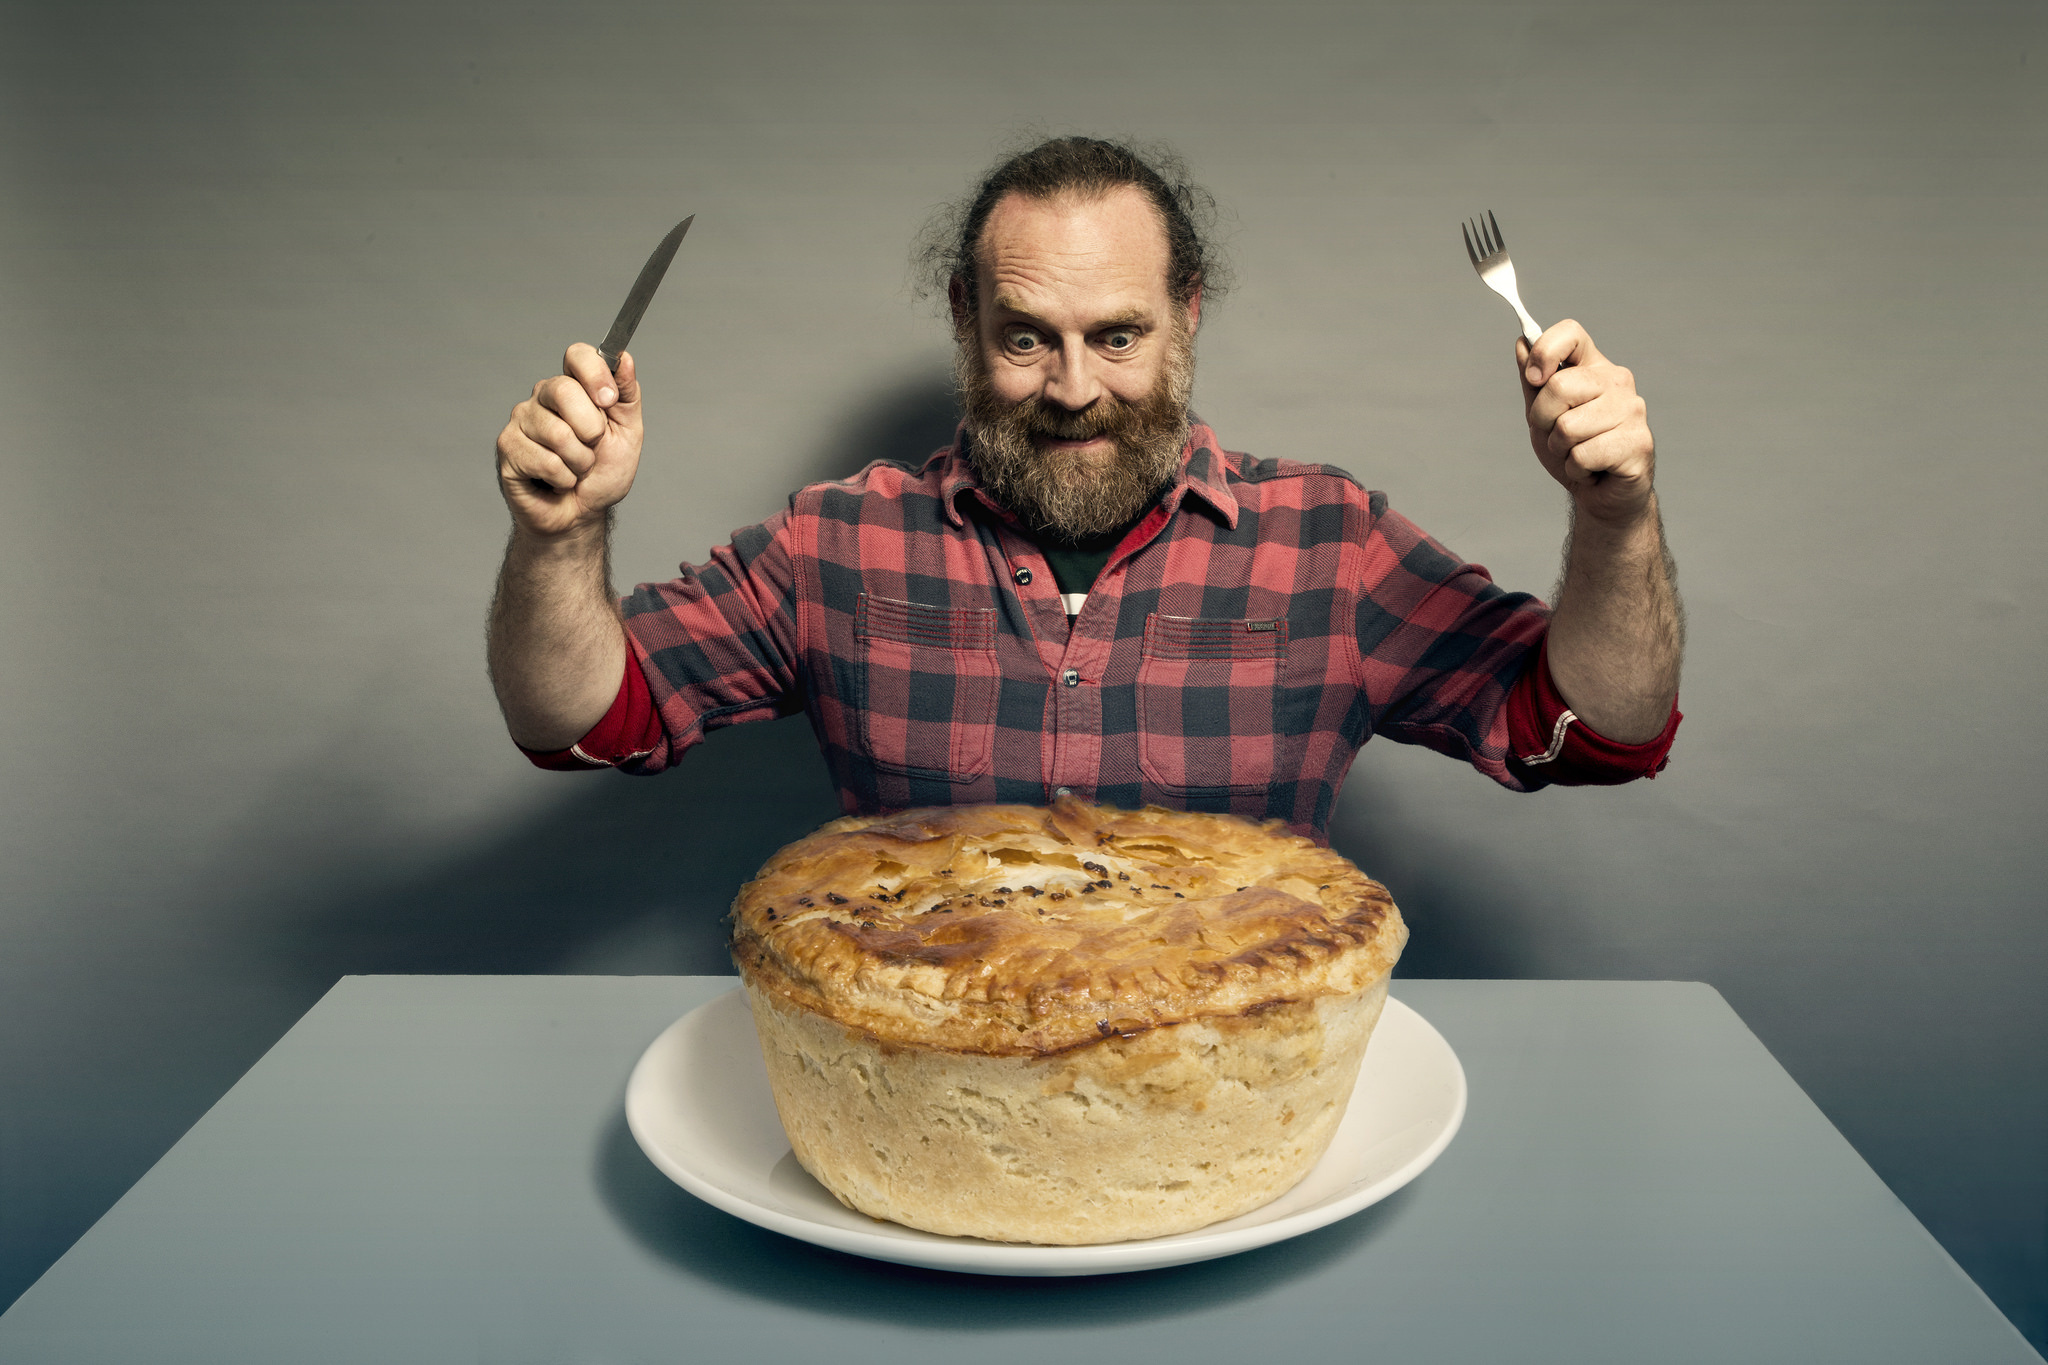 man-sitting-on-a-chair-with-holding-cutlery-fork-and-knife-on-hand-in-front-of-the-giant-drama-pie.jpg